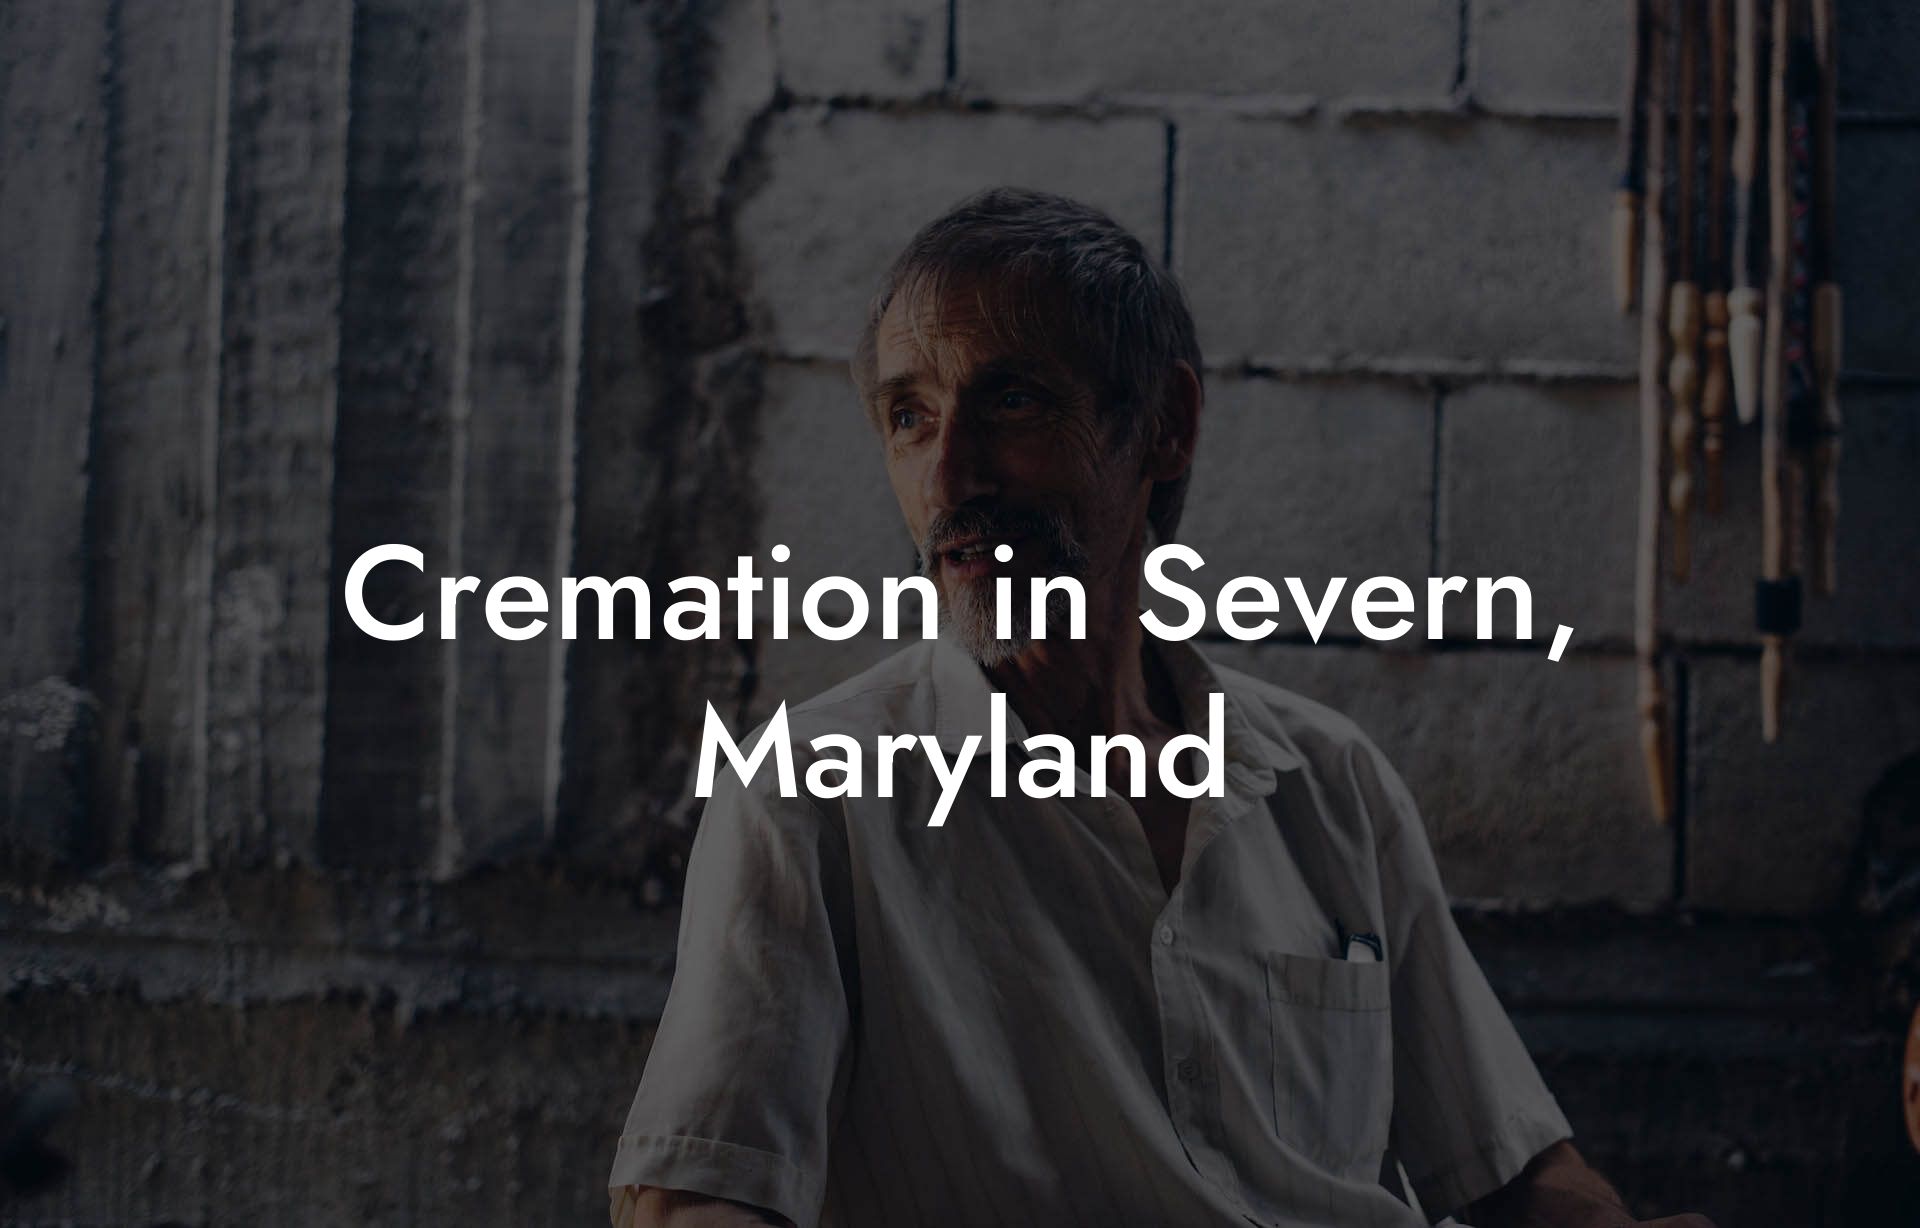 Cremation in Severn, Maryland